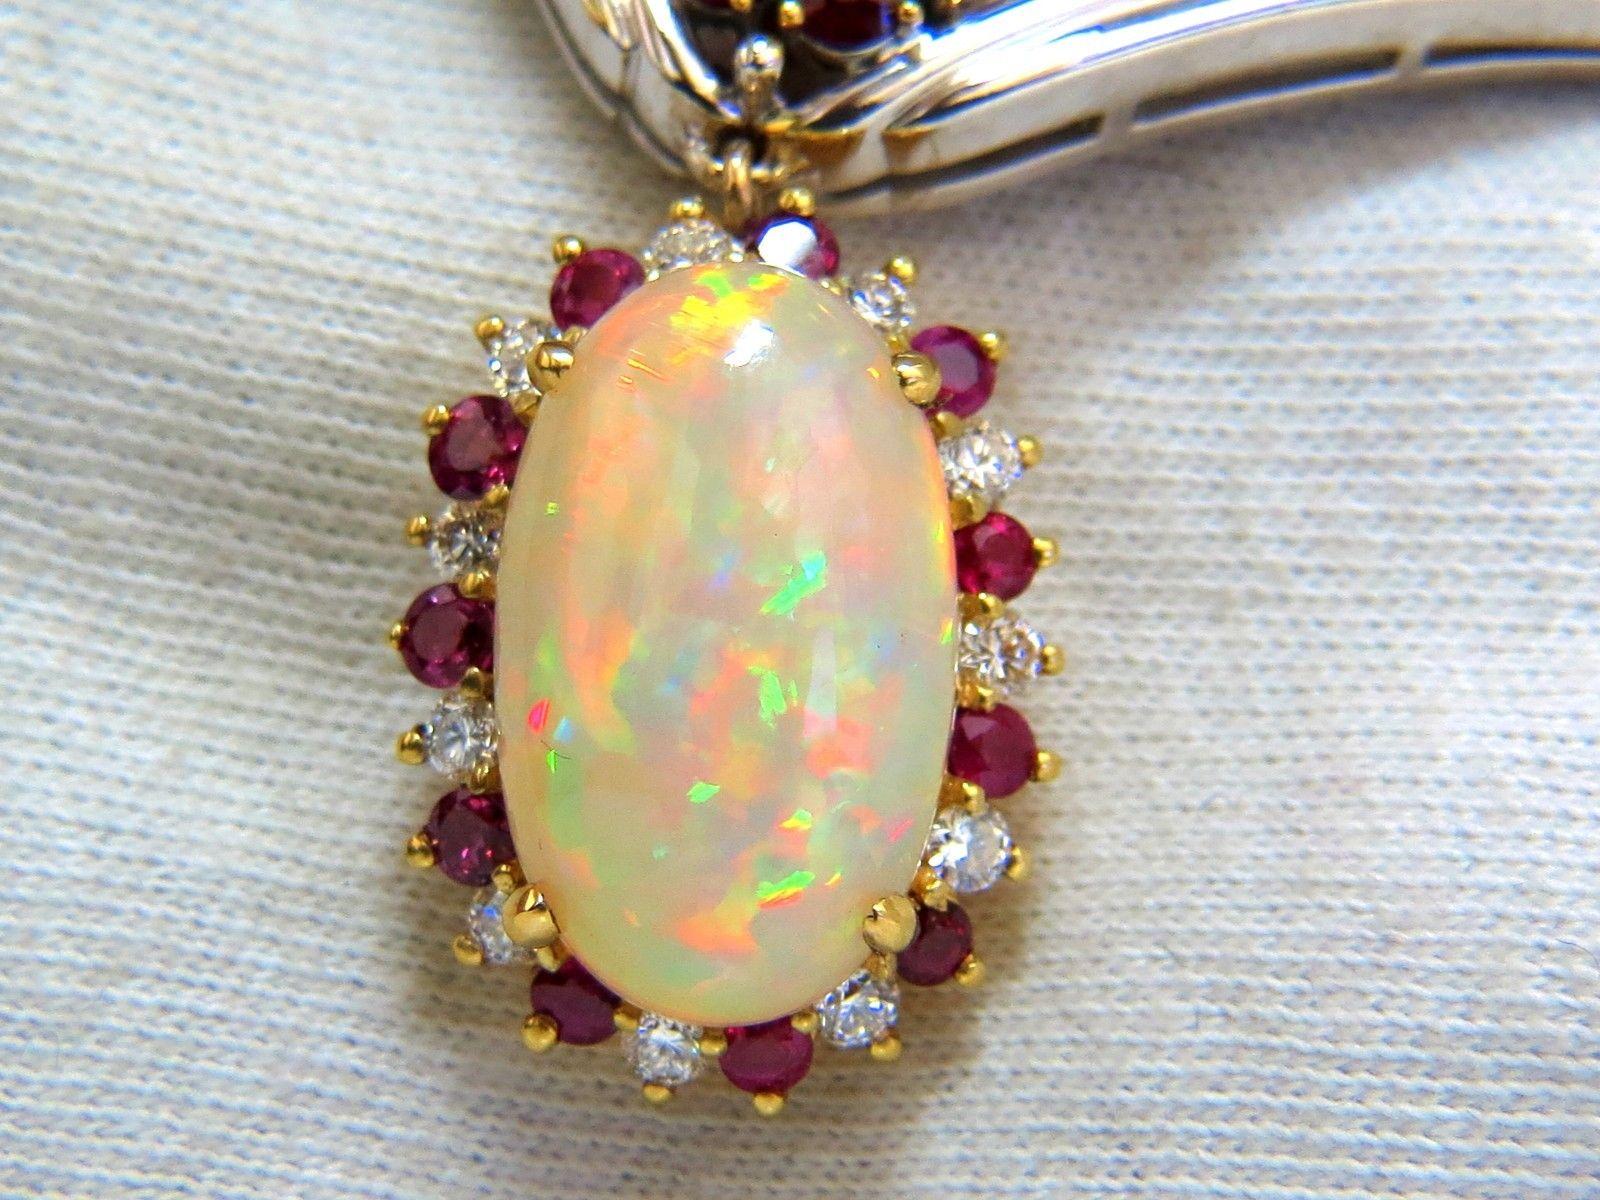 15.14ct. Natural Opal Necklace

Oval Cabochon cut

Superb Vibrant Flashes of colors

Reds, Orange, Blues and Greens.

23 x 14mm Diameter.



3.70ct natural Ruby

1.08ct. Fancy Green Brown Diamond

Side natural diamonds: .50ct.

Full cuts and